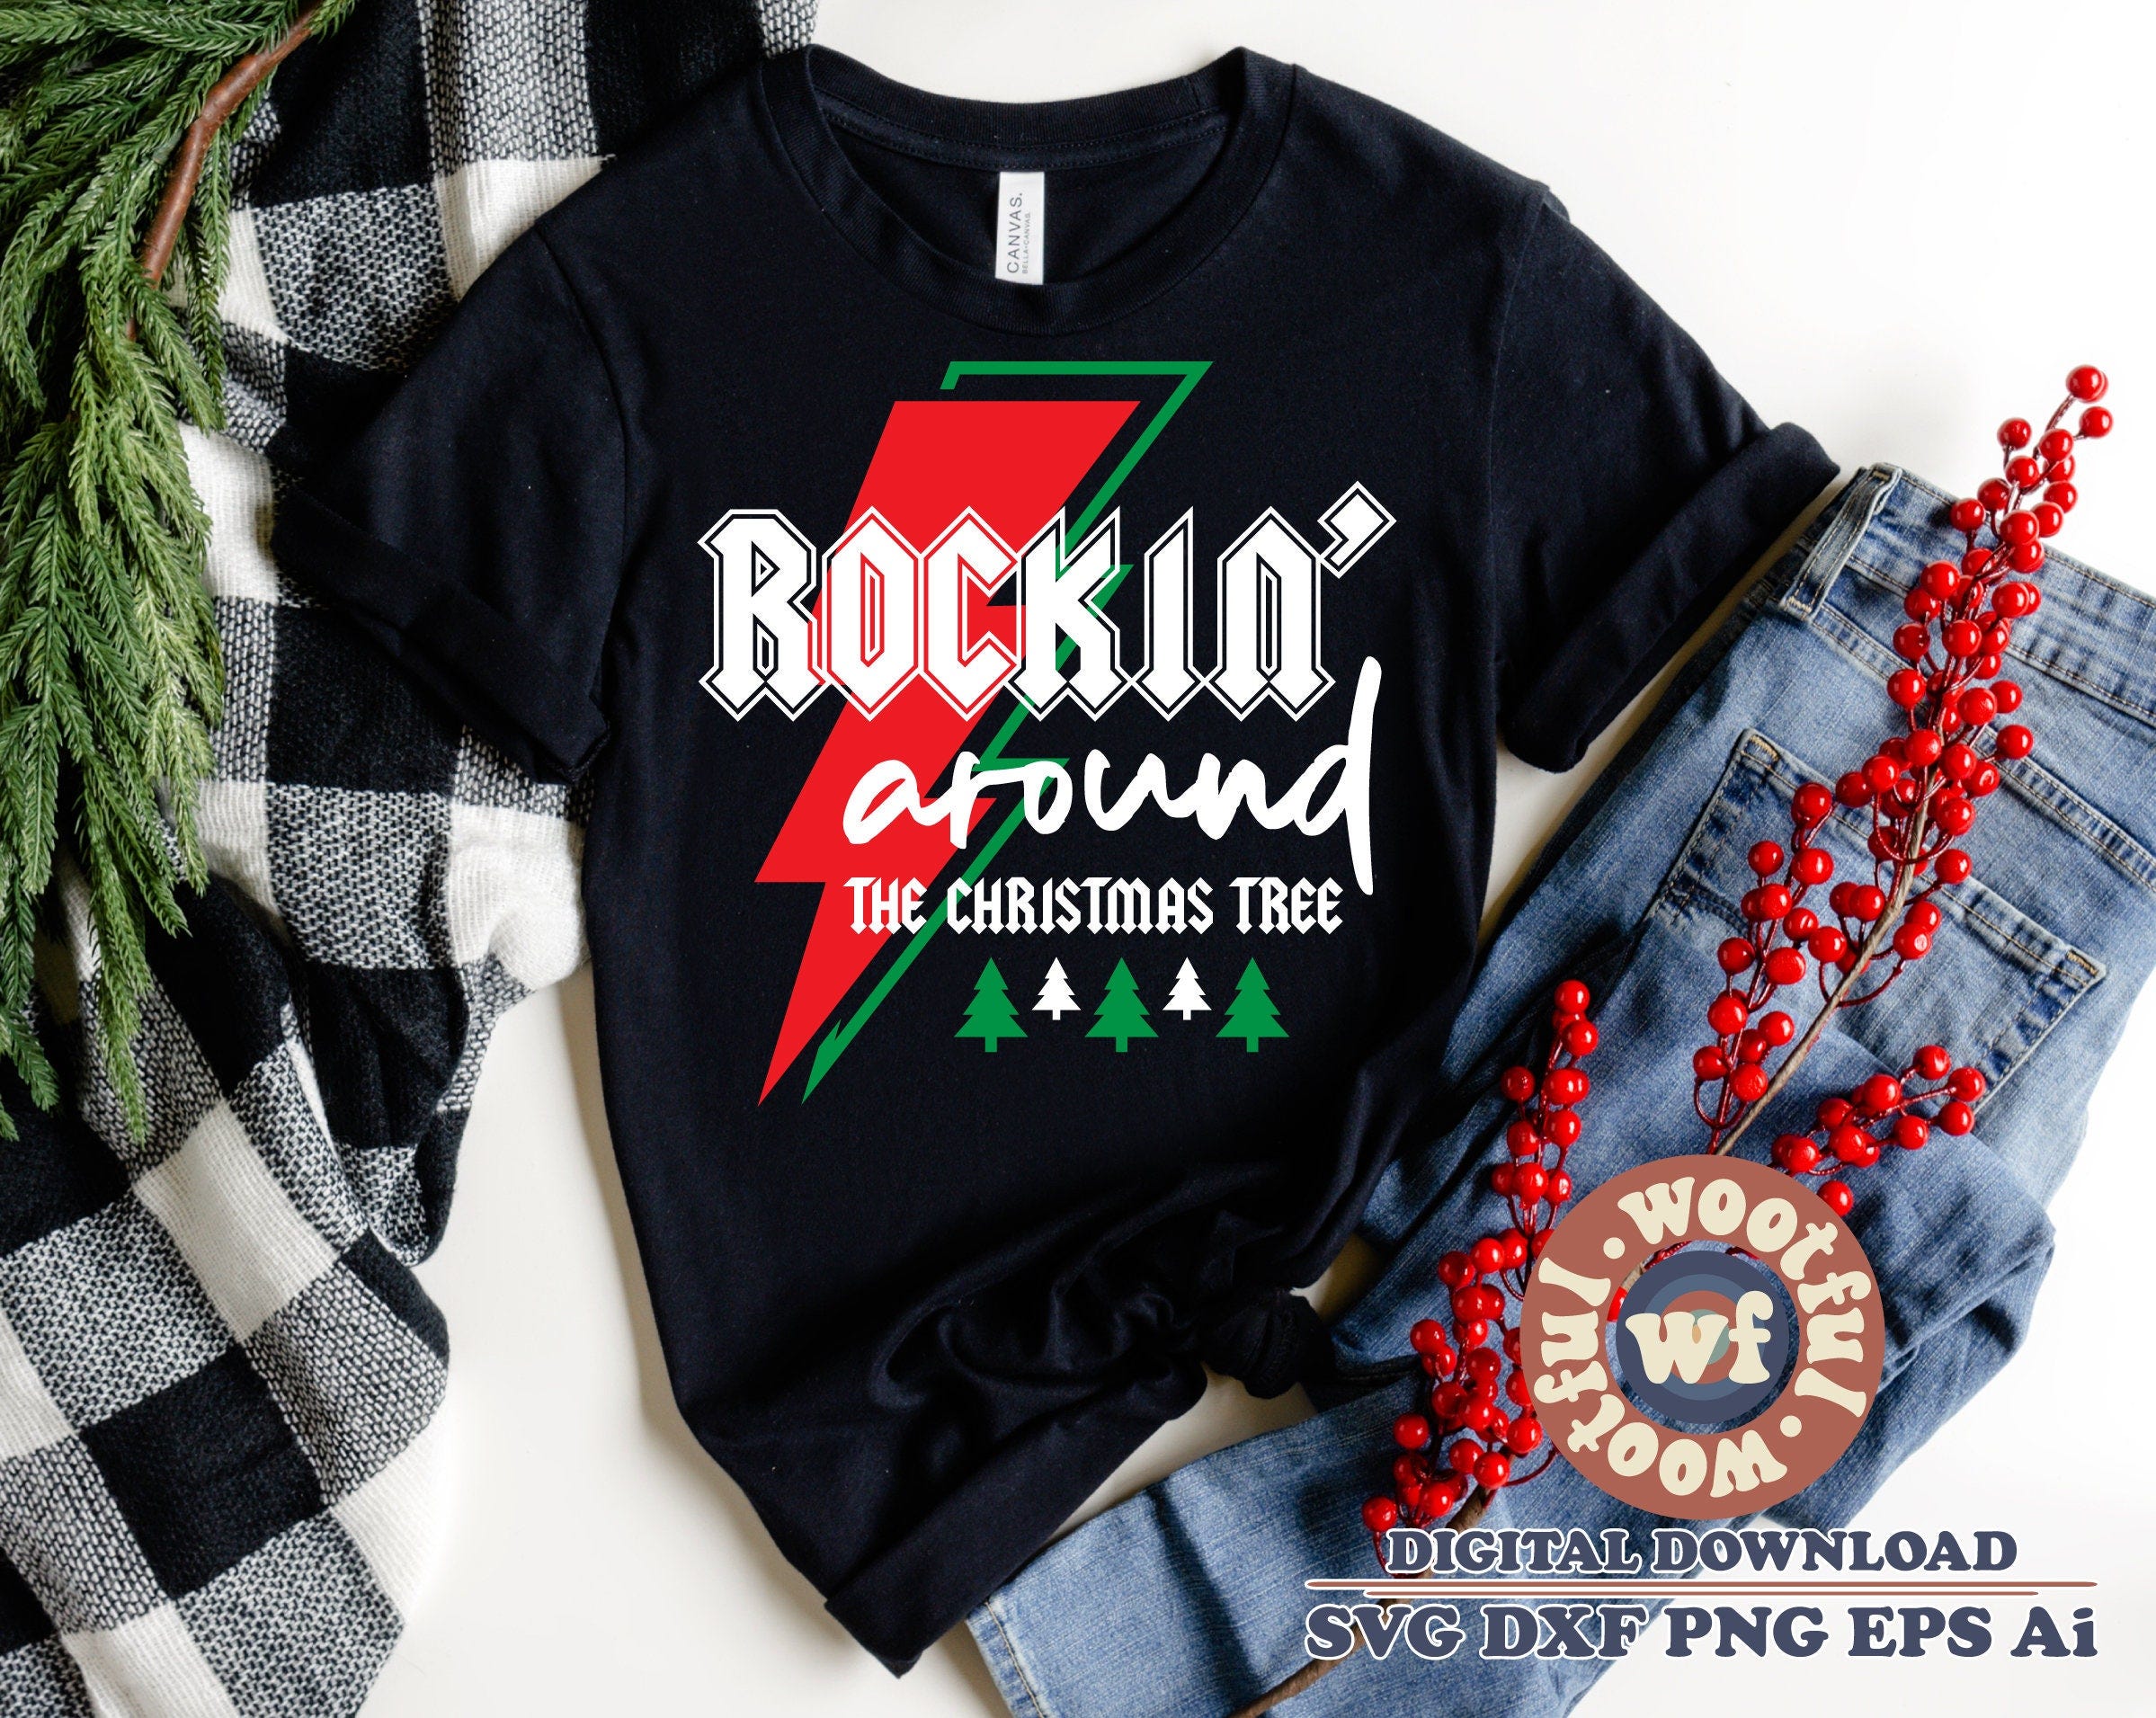 Rockin around the Christmas tree png jpg, Christmas png, xmas tree png, Christmas tree shirt png, cute tree png, retro subllimation tree png